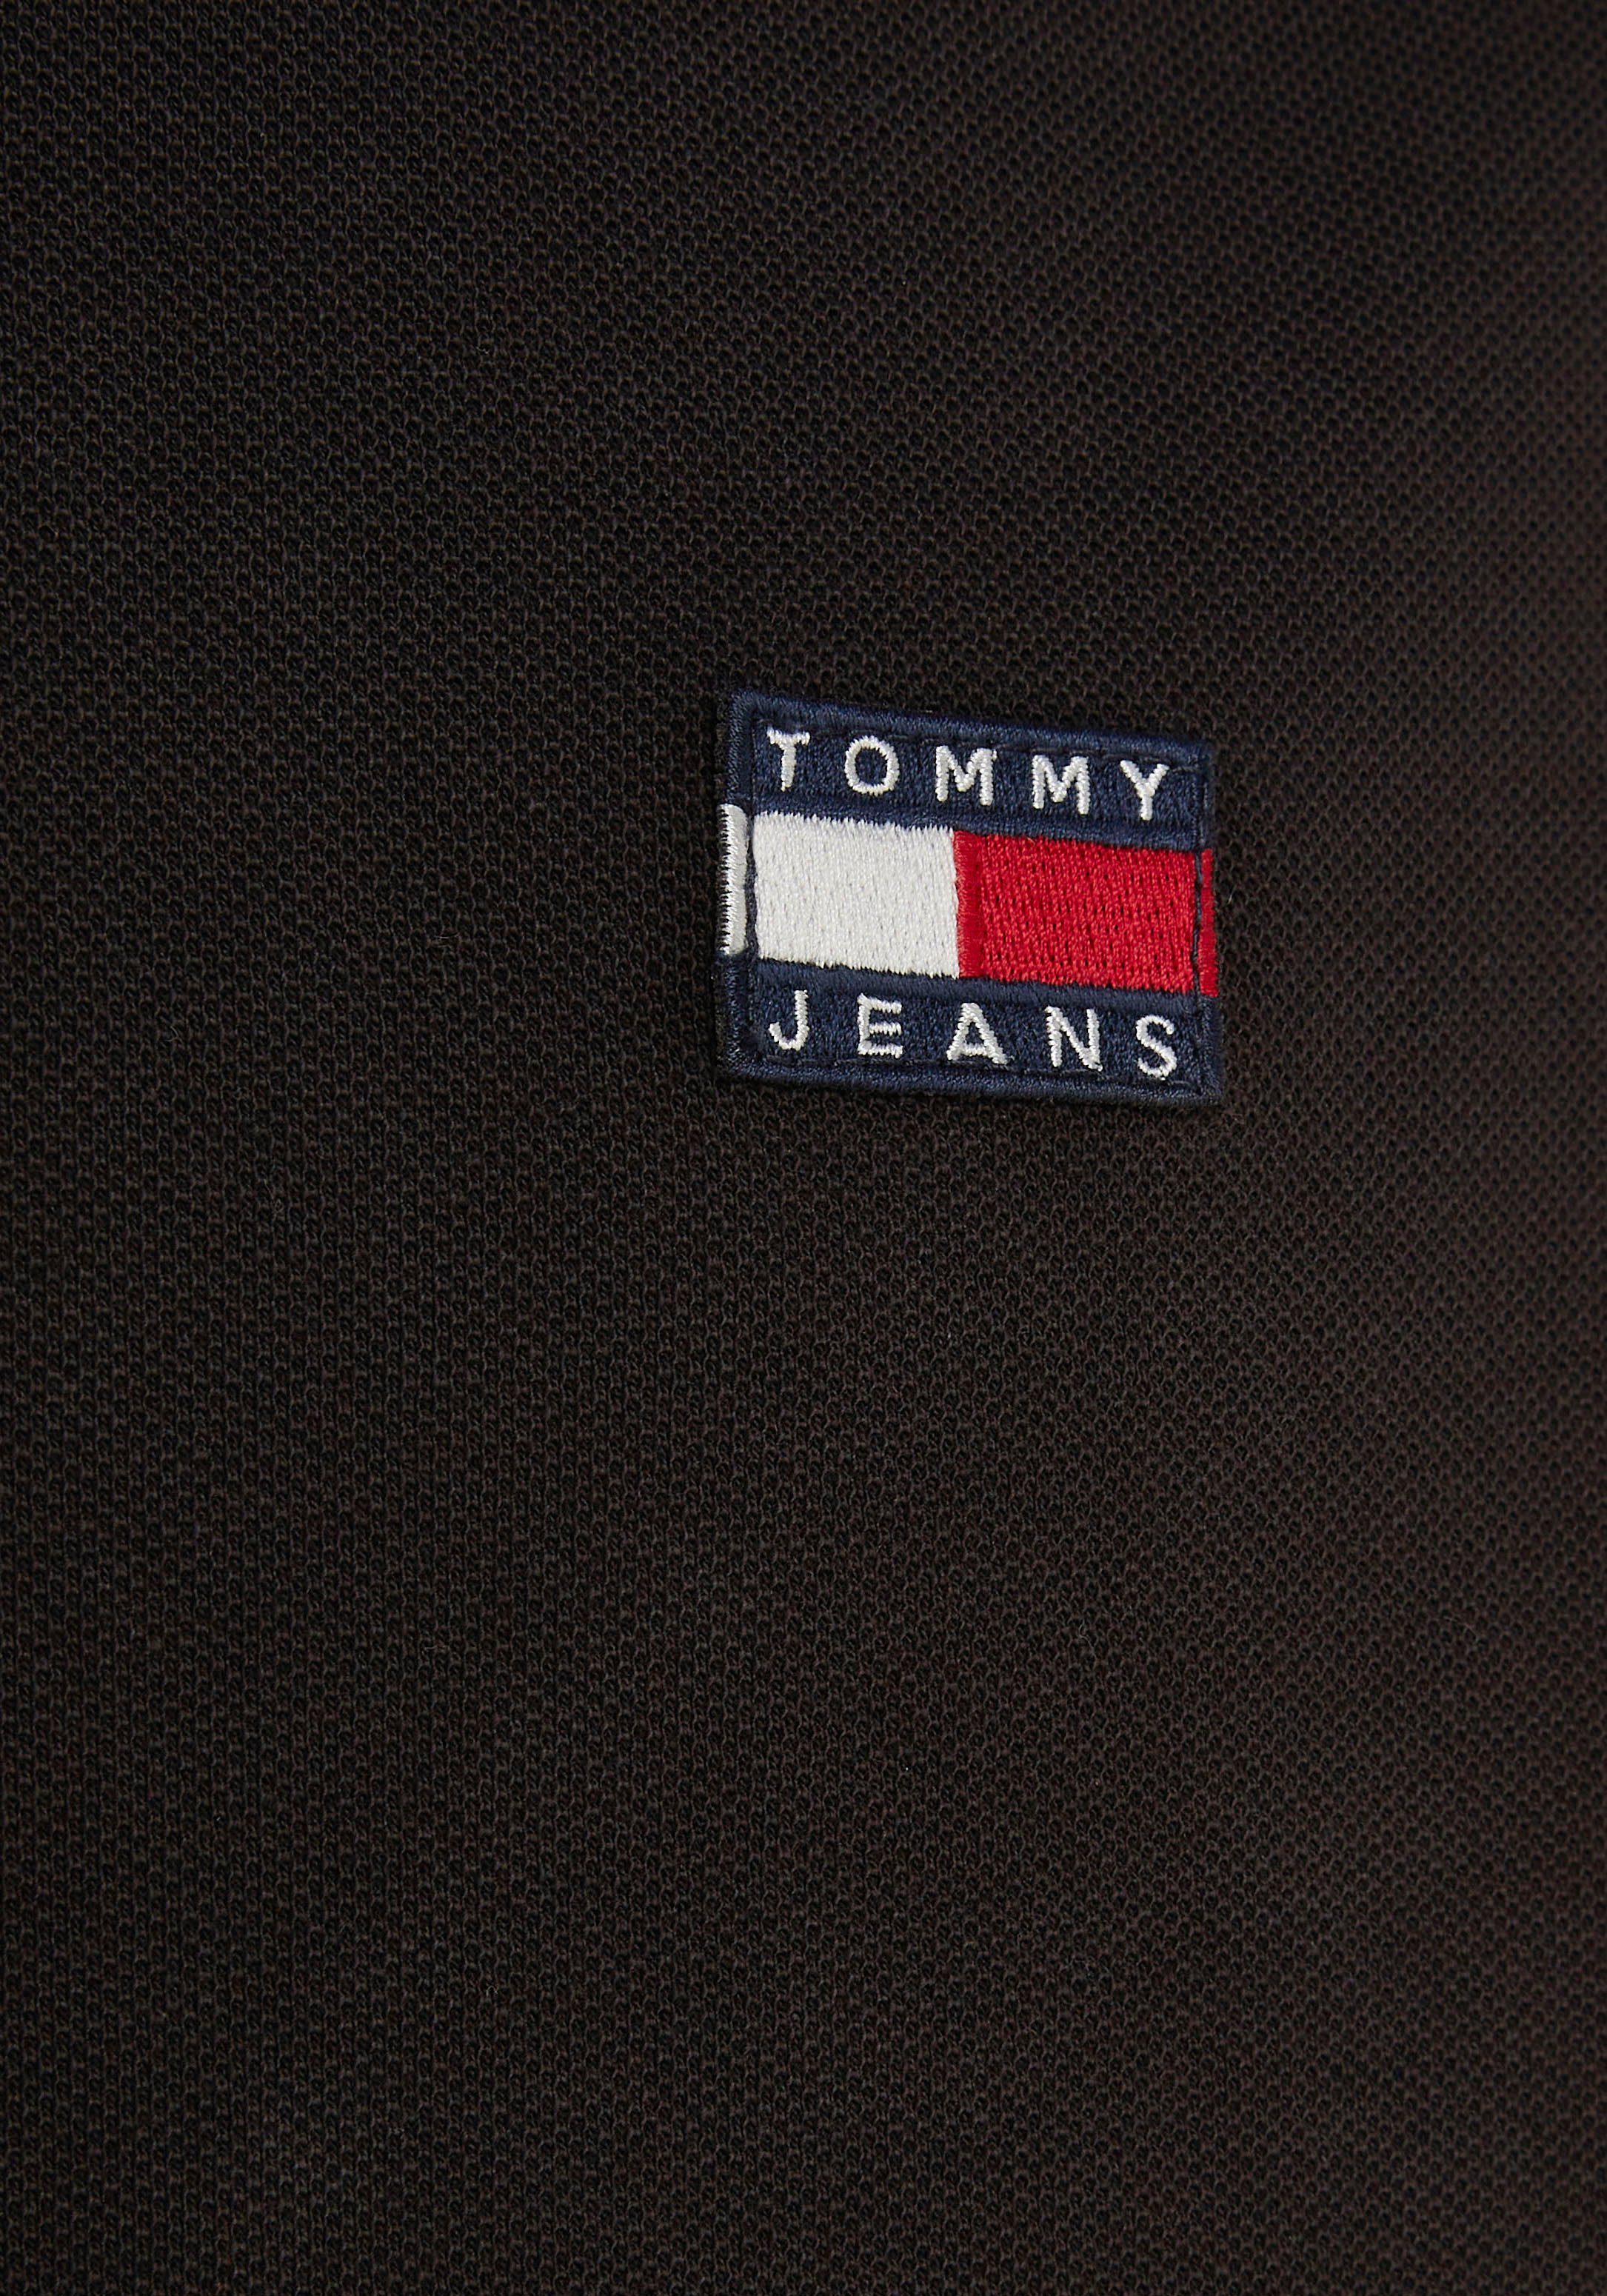 DETAIL Jeans CLSC TJM POLO Tommy Black Poloshirt TIPPING